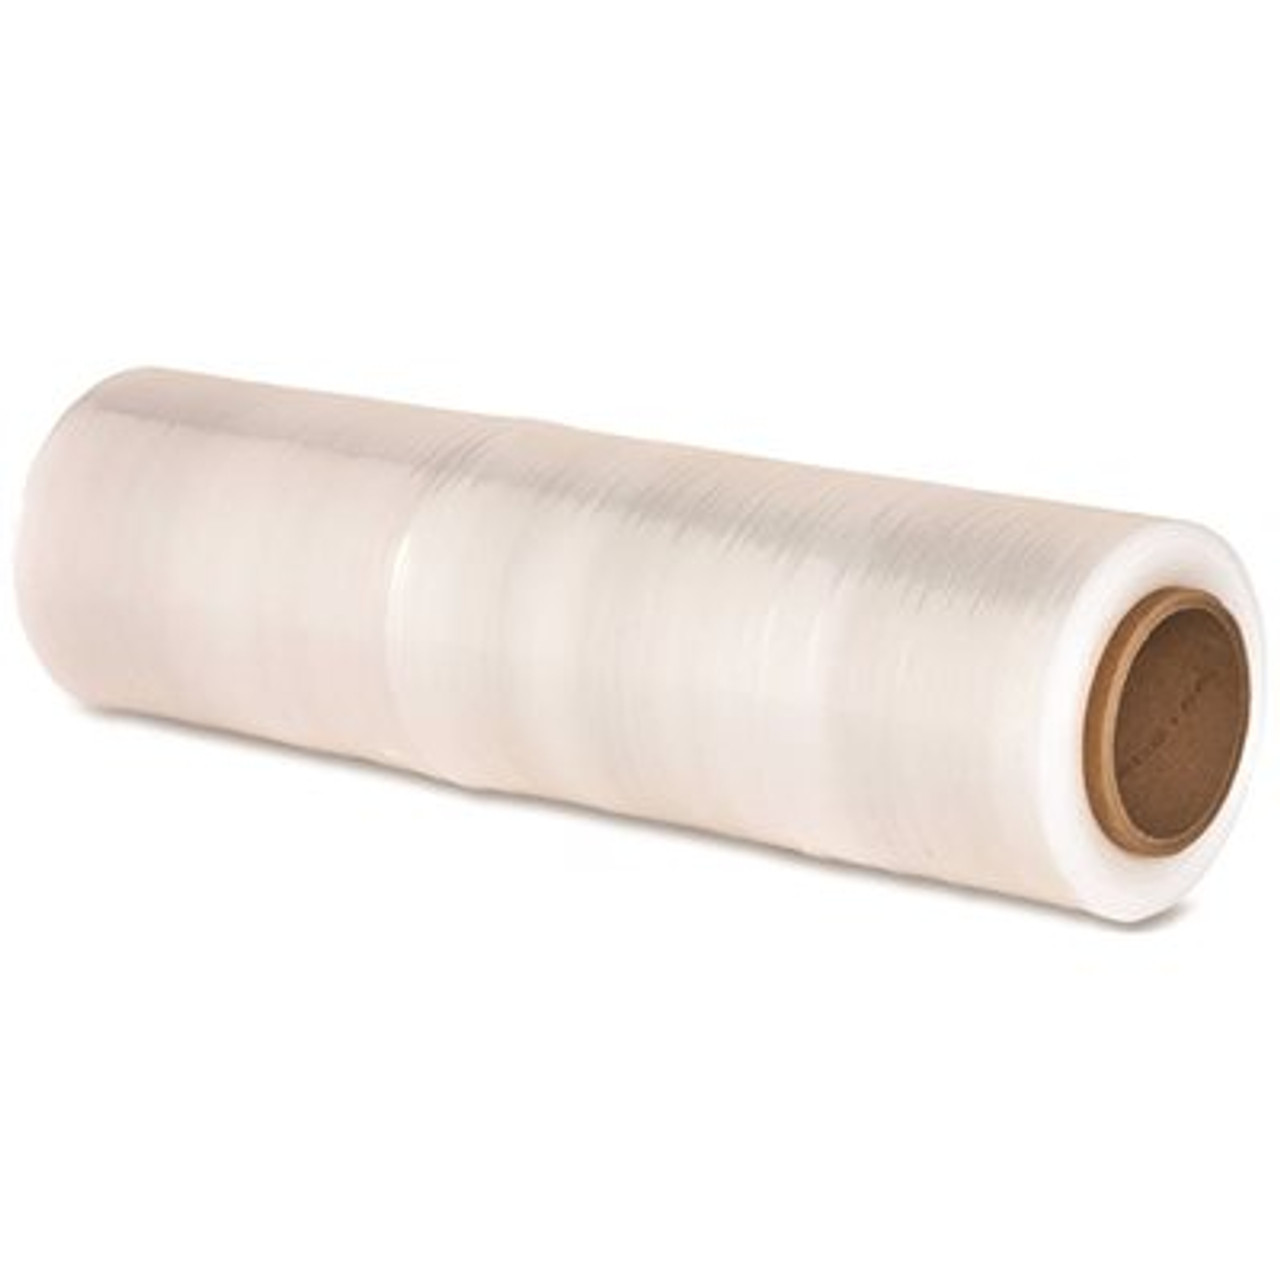 Sparco 18 in. by 1500 ft. Sparco Stretch Film, Heavy Weight, Clear